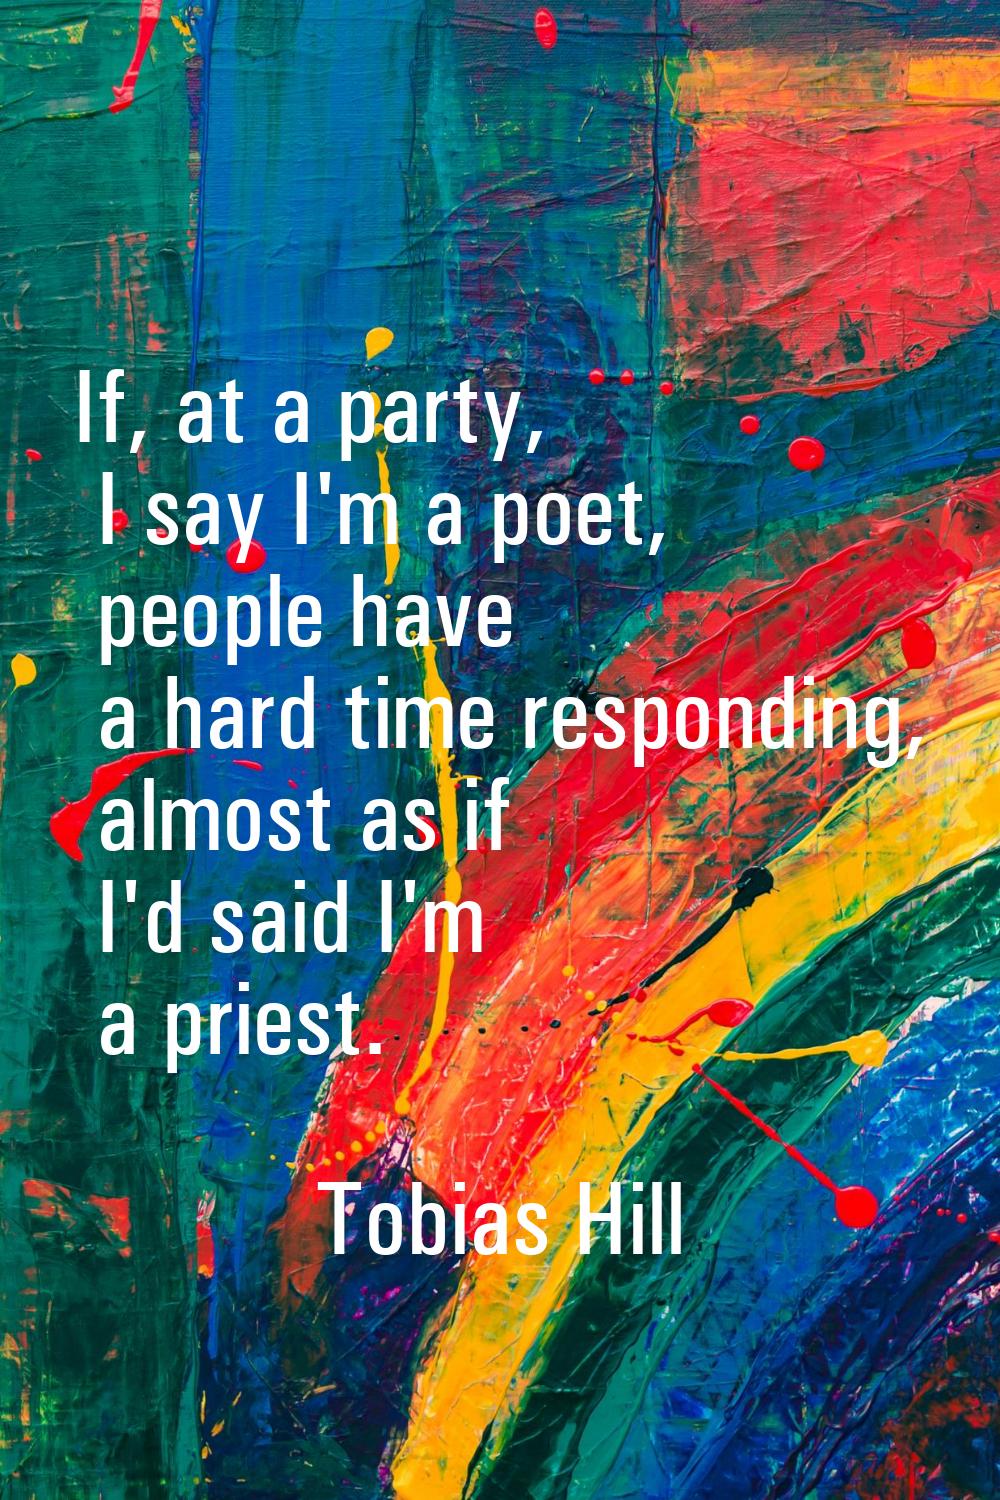 If, at a party, I say I'm a poet, people have a hard time responding, almost as if I'd said I'm a p